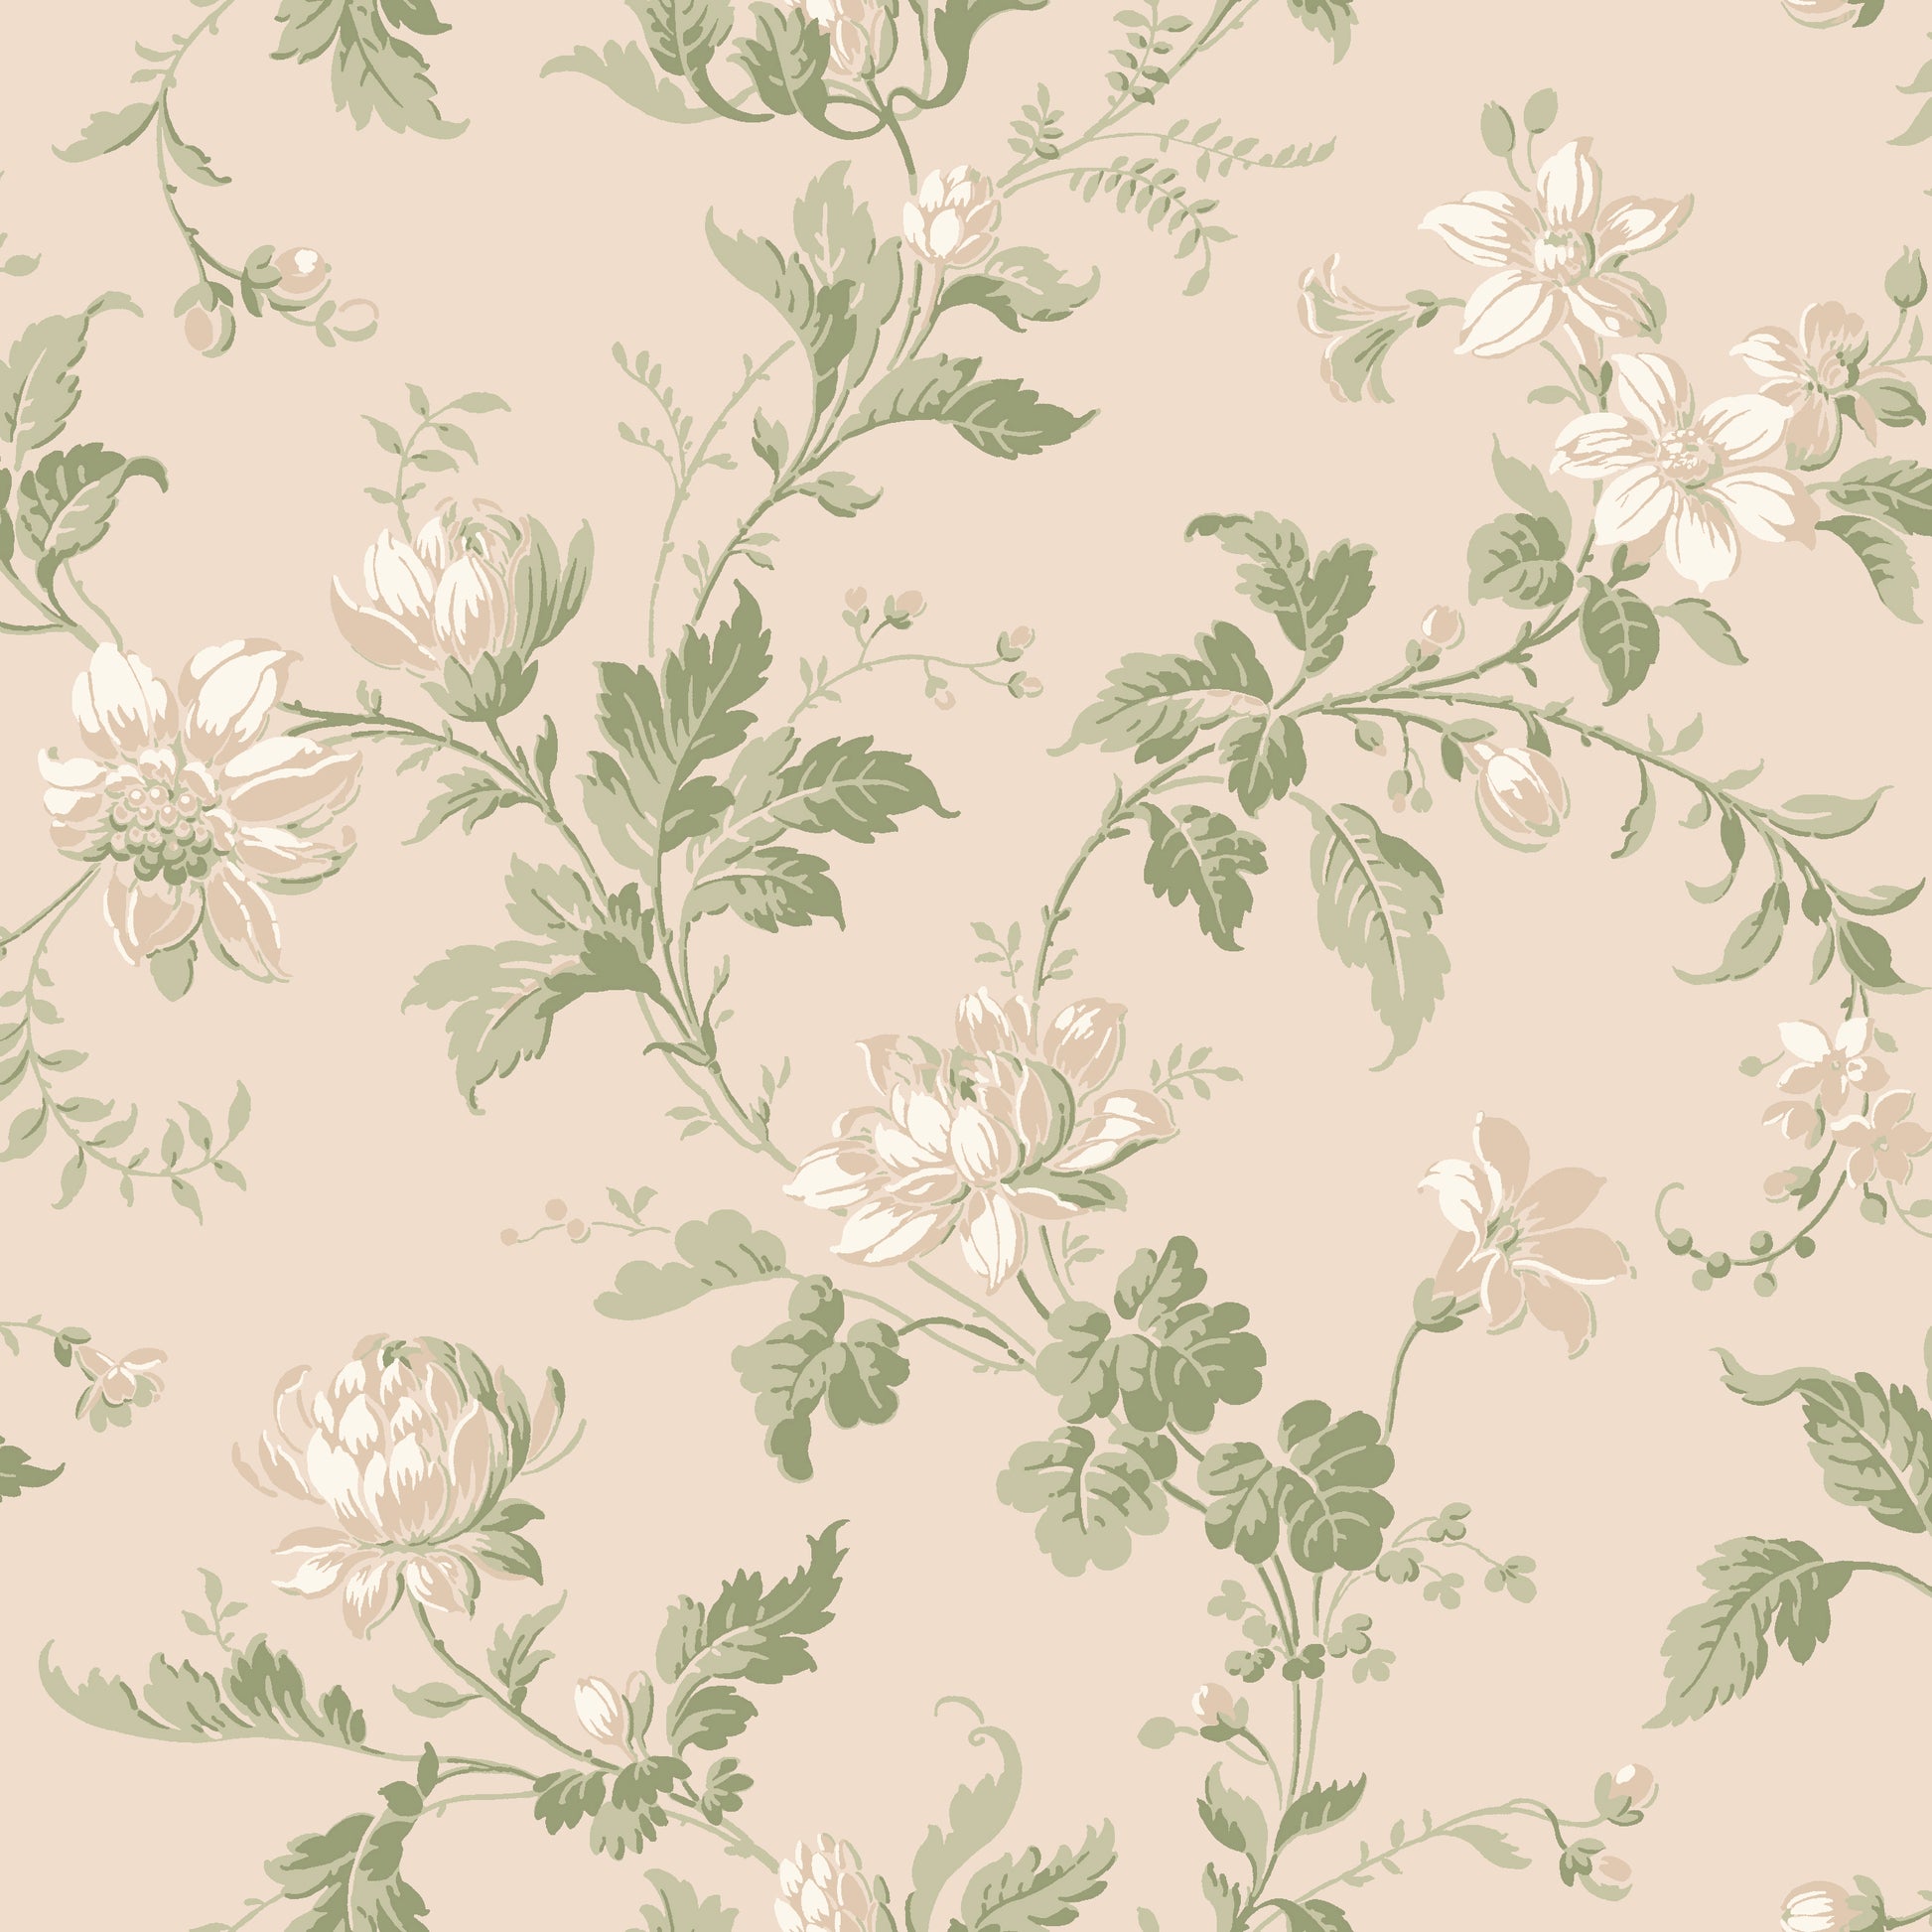 Inspired by the intricate patterns and masterful compositions of 19th century interior styling, our Blomslinga wallpaper is a beautiful testament to the artistry and exquisiteness of Mother Nature at her finest. 